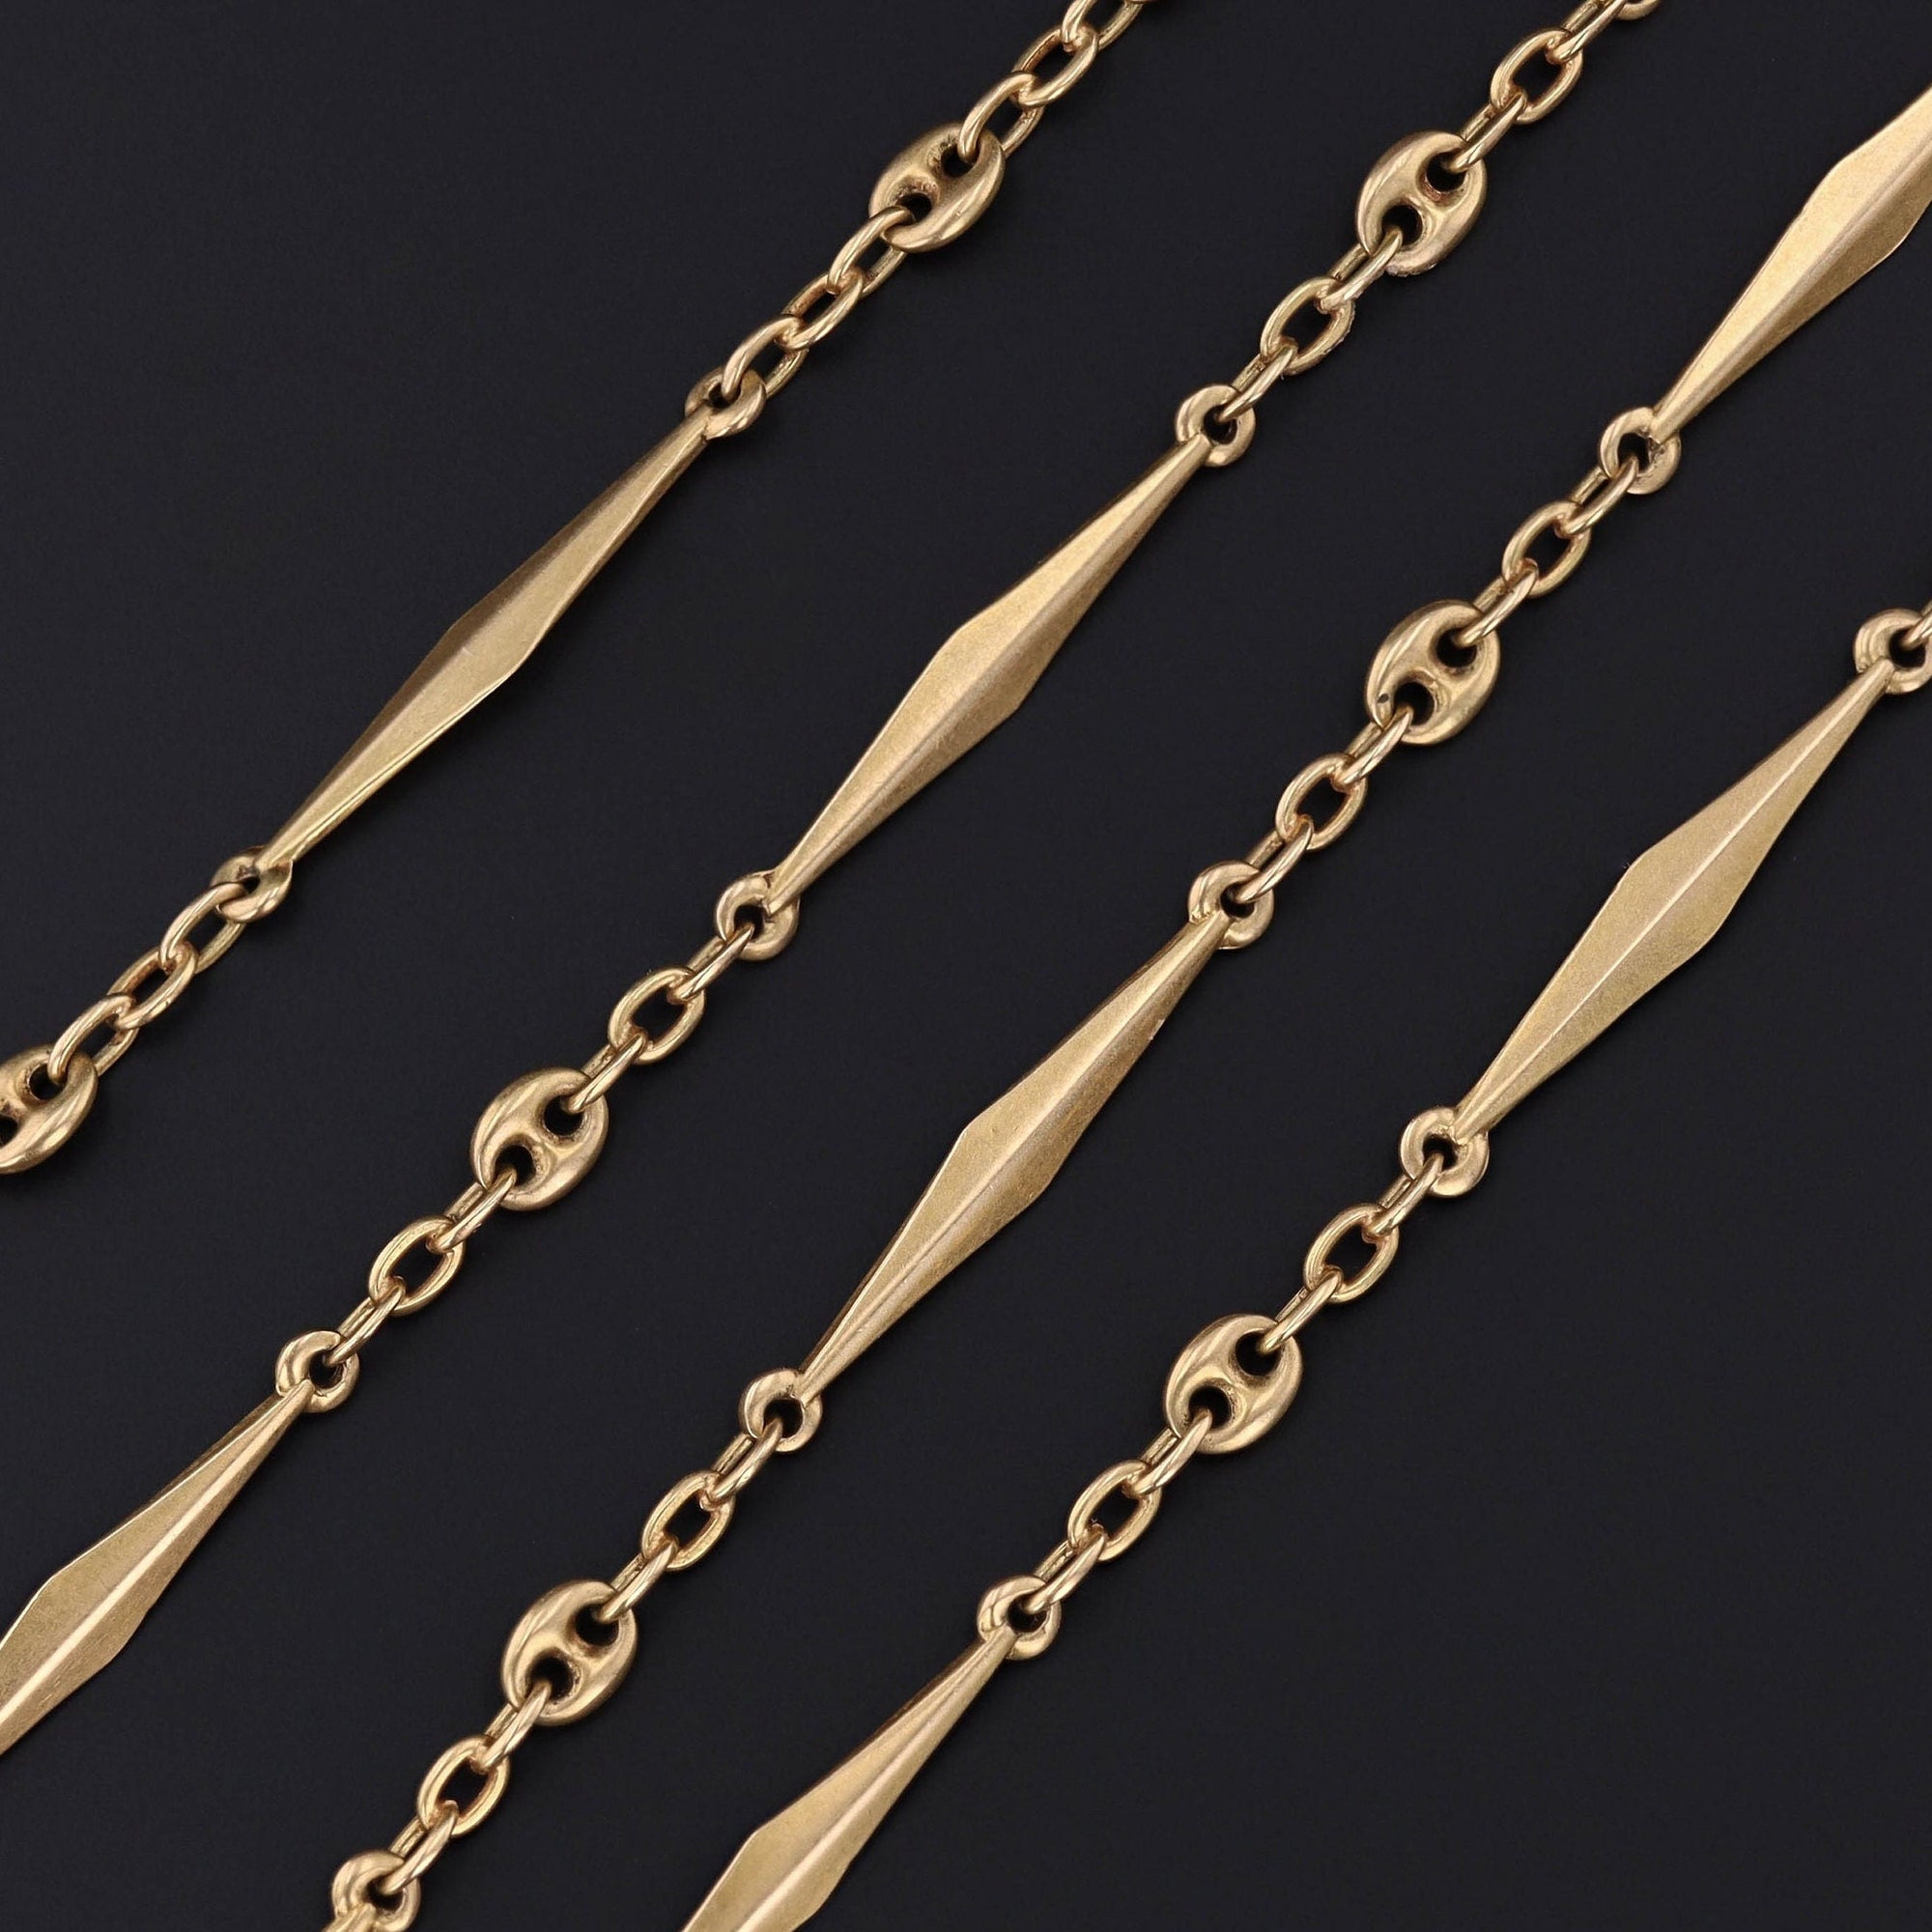 Vintage Long Chain Necklace of 18k Gold